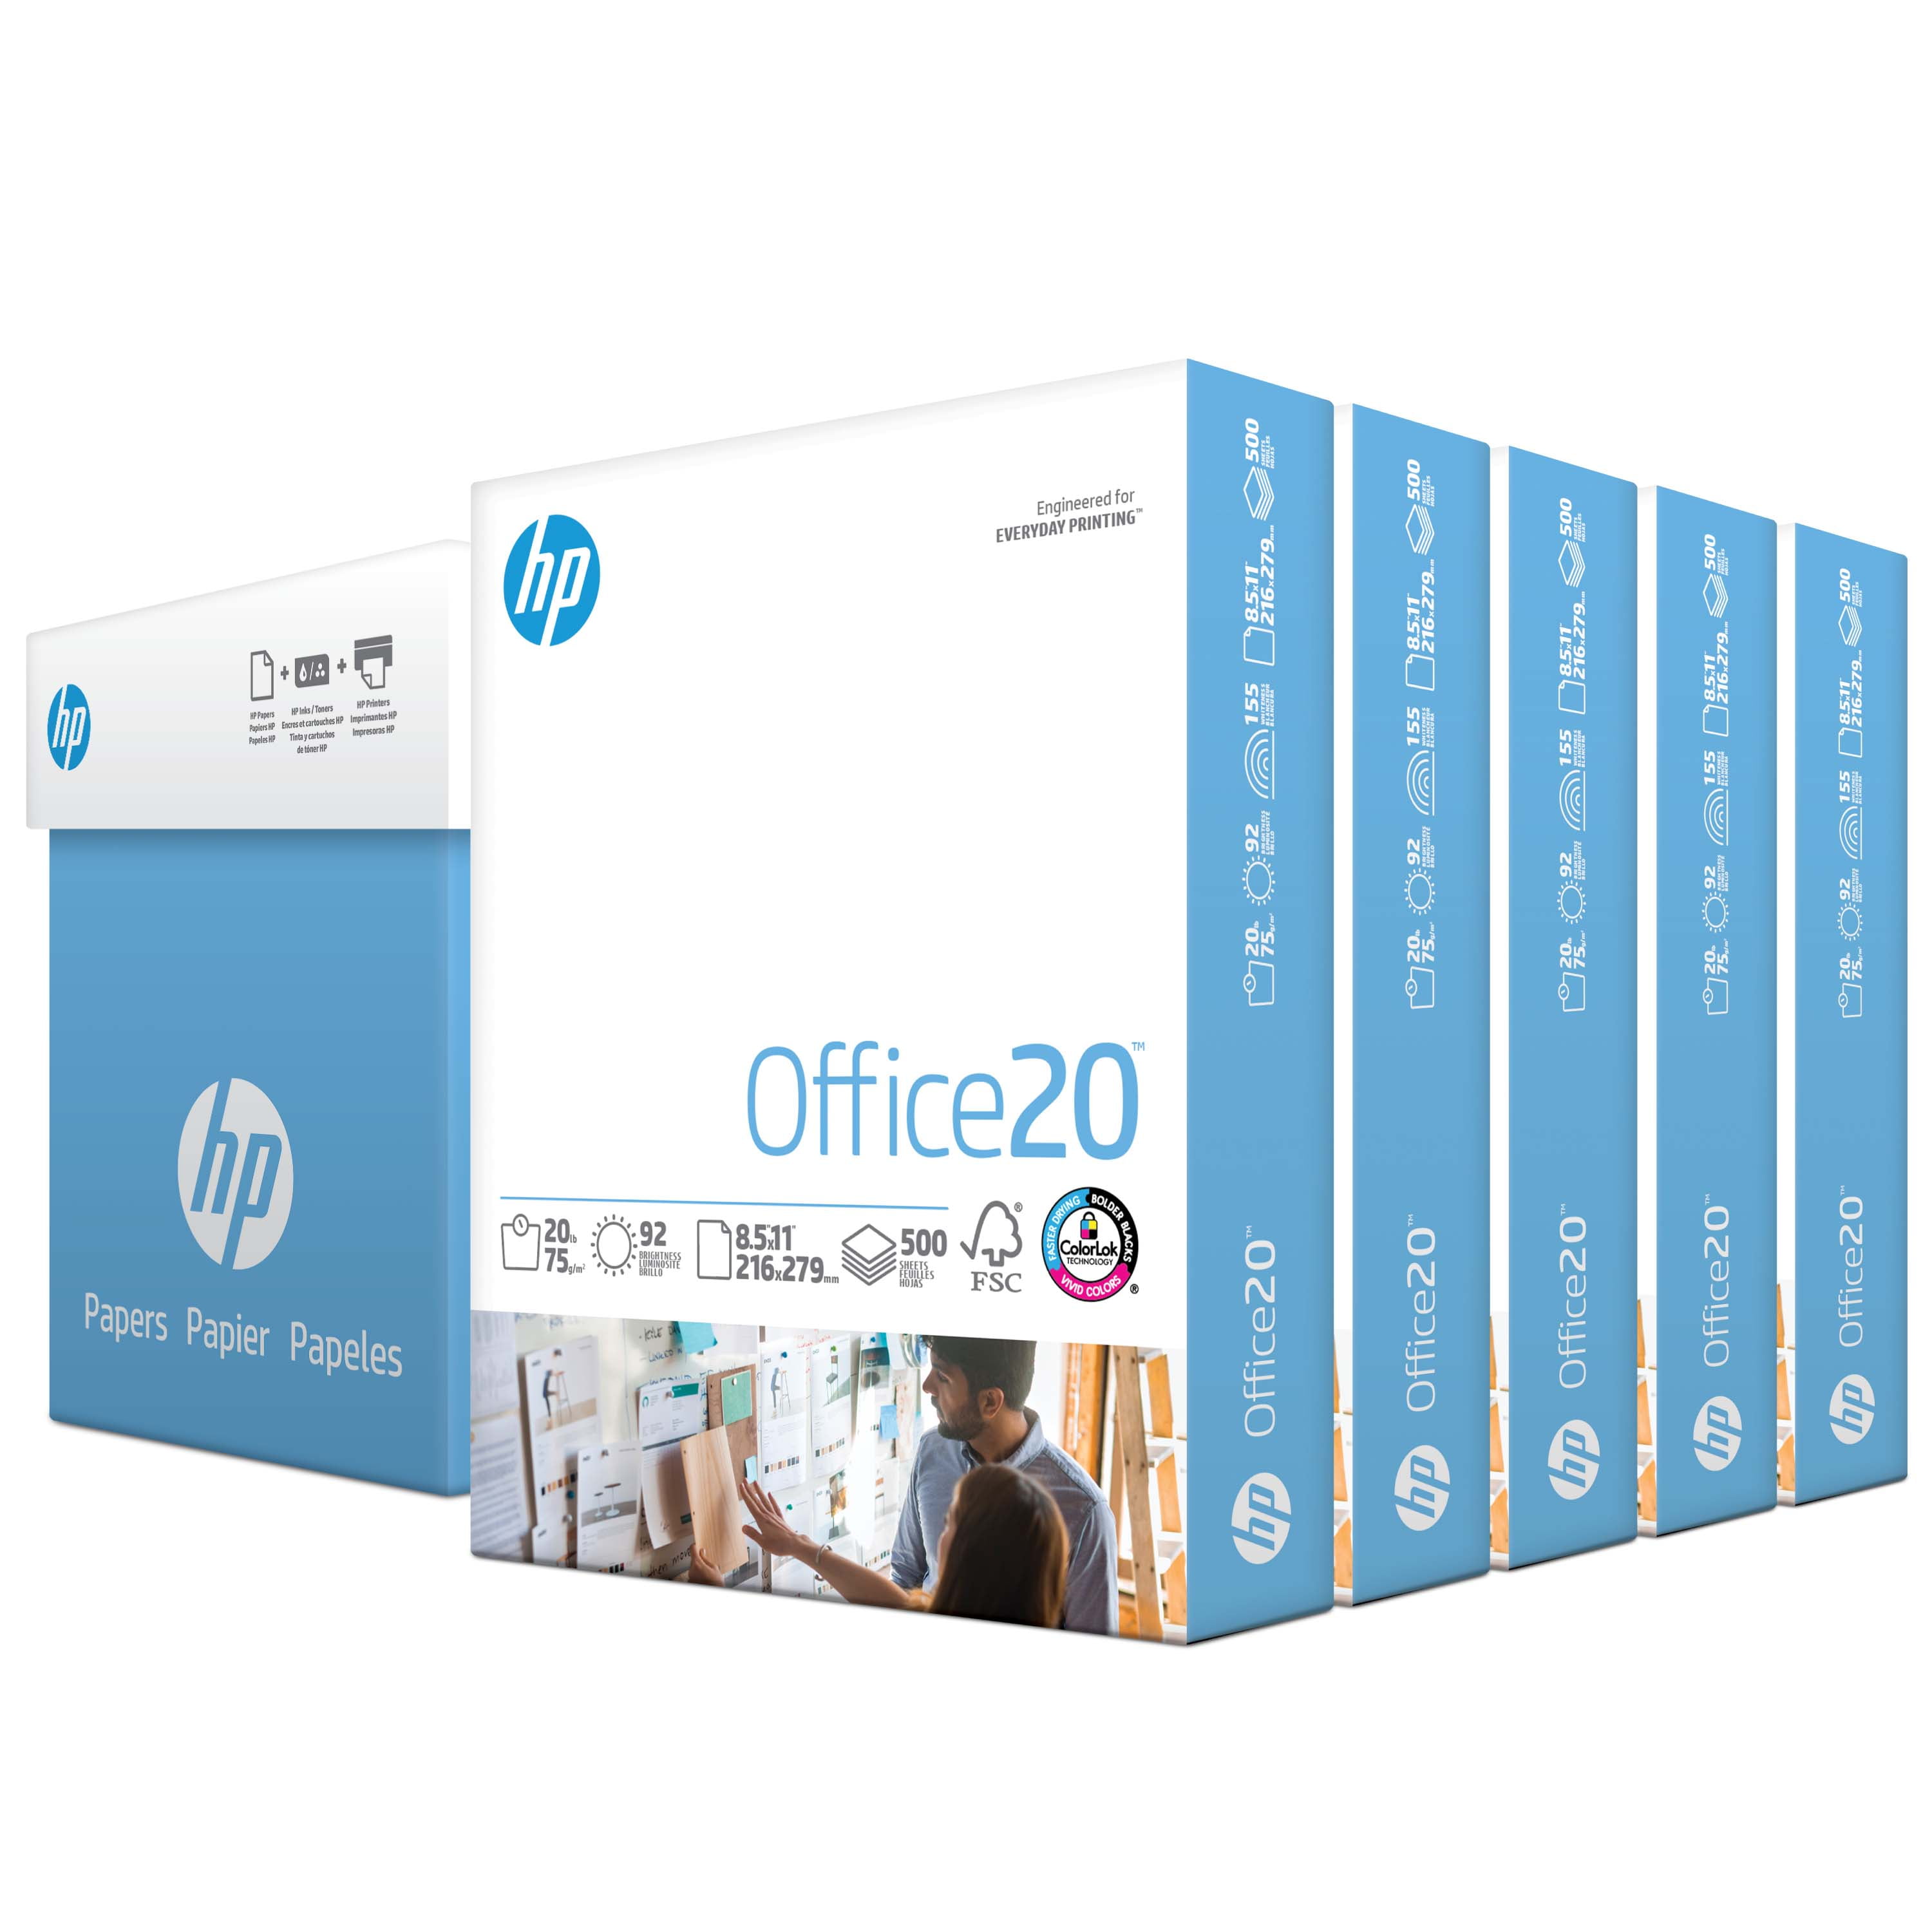 HP Papers Office20 Paper, 92 Bright, 20lb, 8.5 x 11, White, 500 Sheets/Ream, 5 Reams/Carton